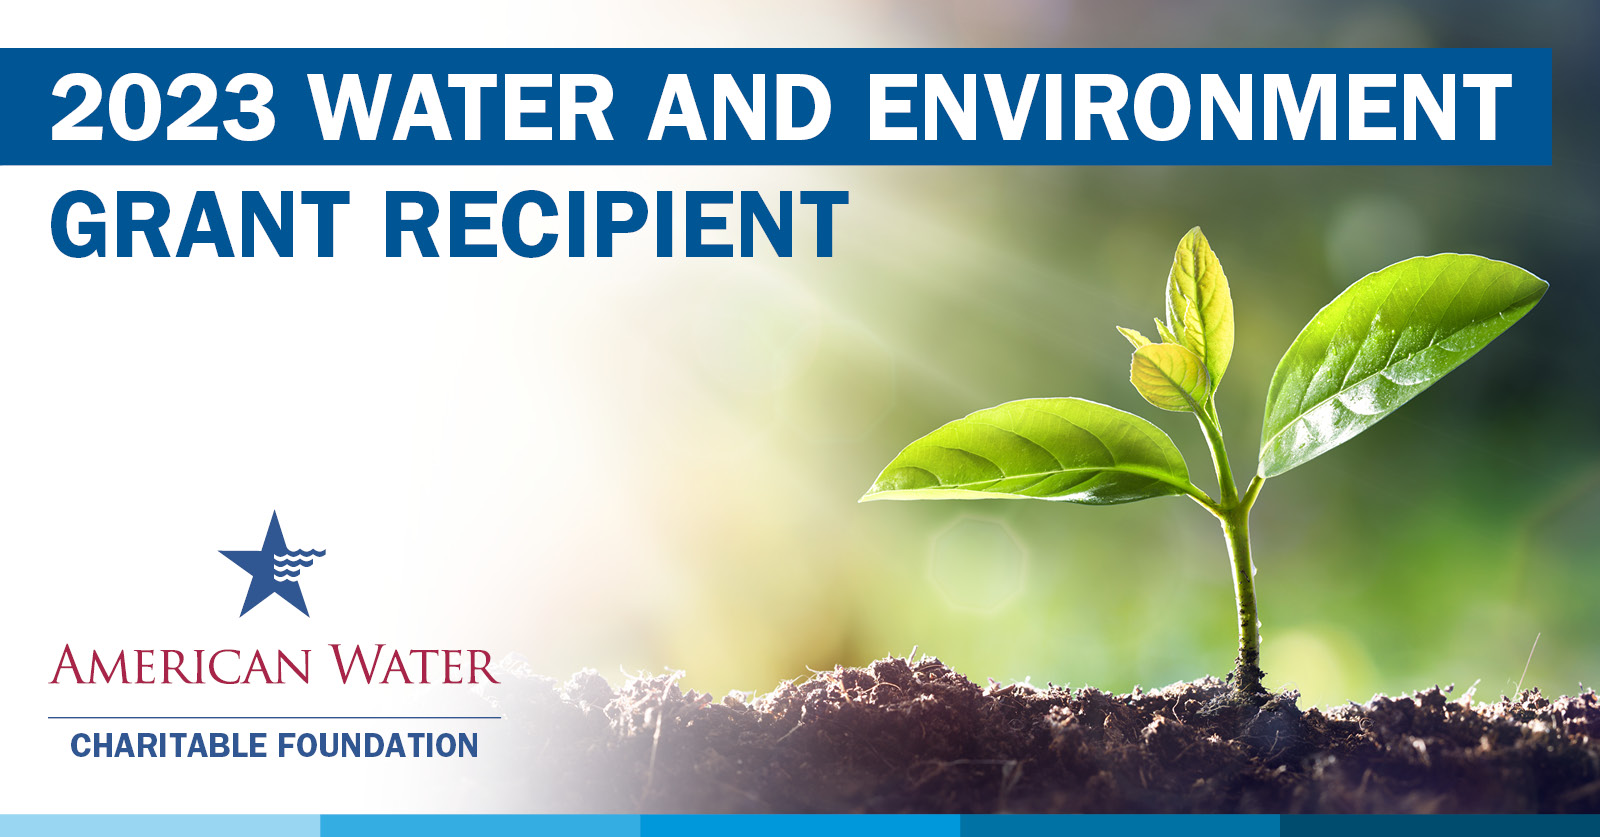 The National Great Rivers Research and Education Center (NGRREC℠) announced this week that it is the recipient of an American Water Charitable Foundation 2023 Water and Environment grant, focused on the expansion of the Water Festival experience to the Chicago and Bellville service areas.